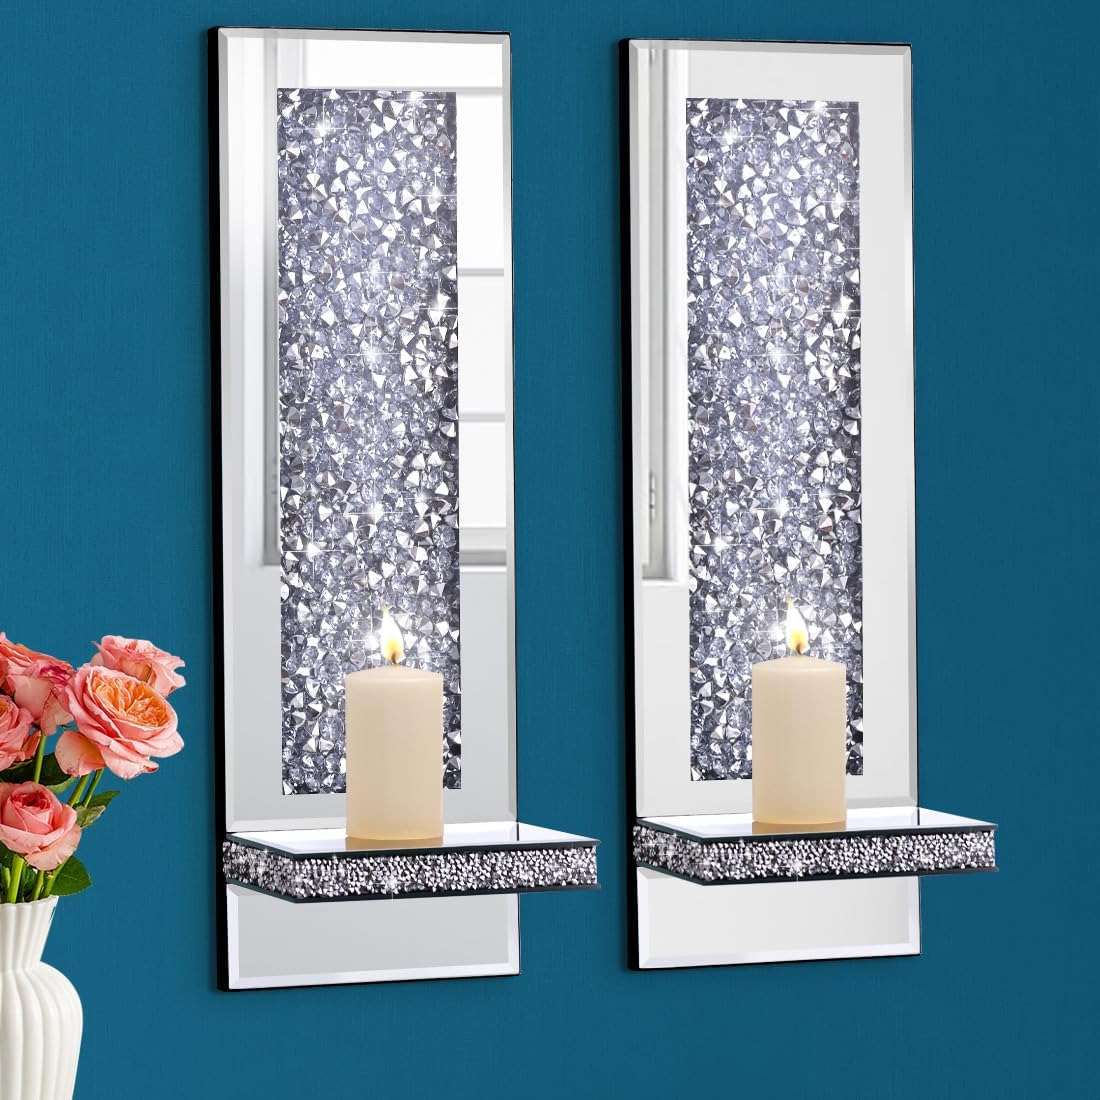 Crystal Crush Diamond Mirrored Candle Sconces, Silver Wall Candle Holder Set of 